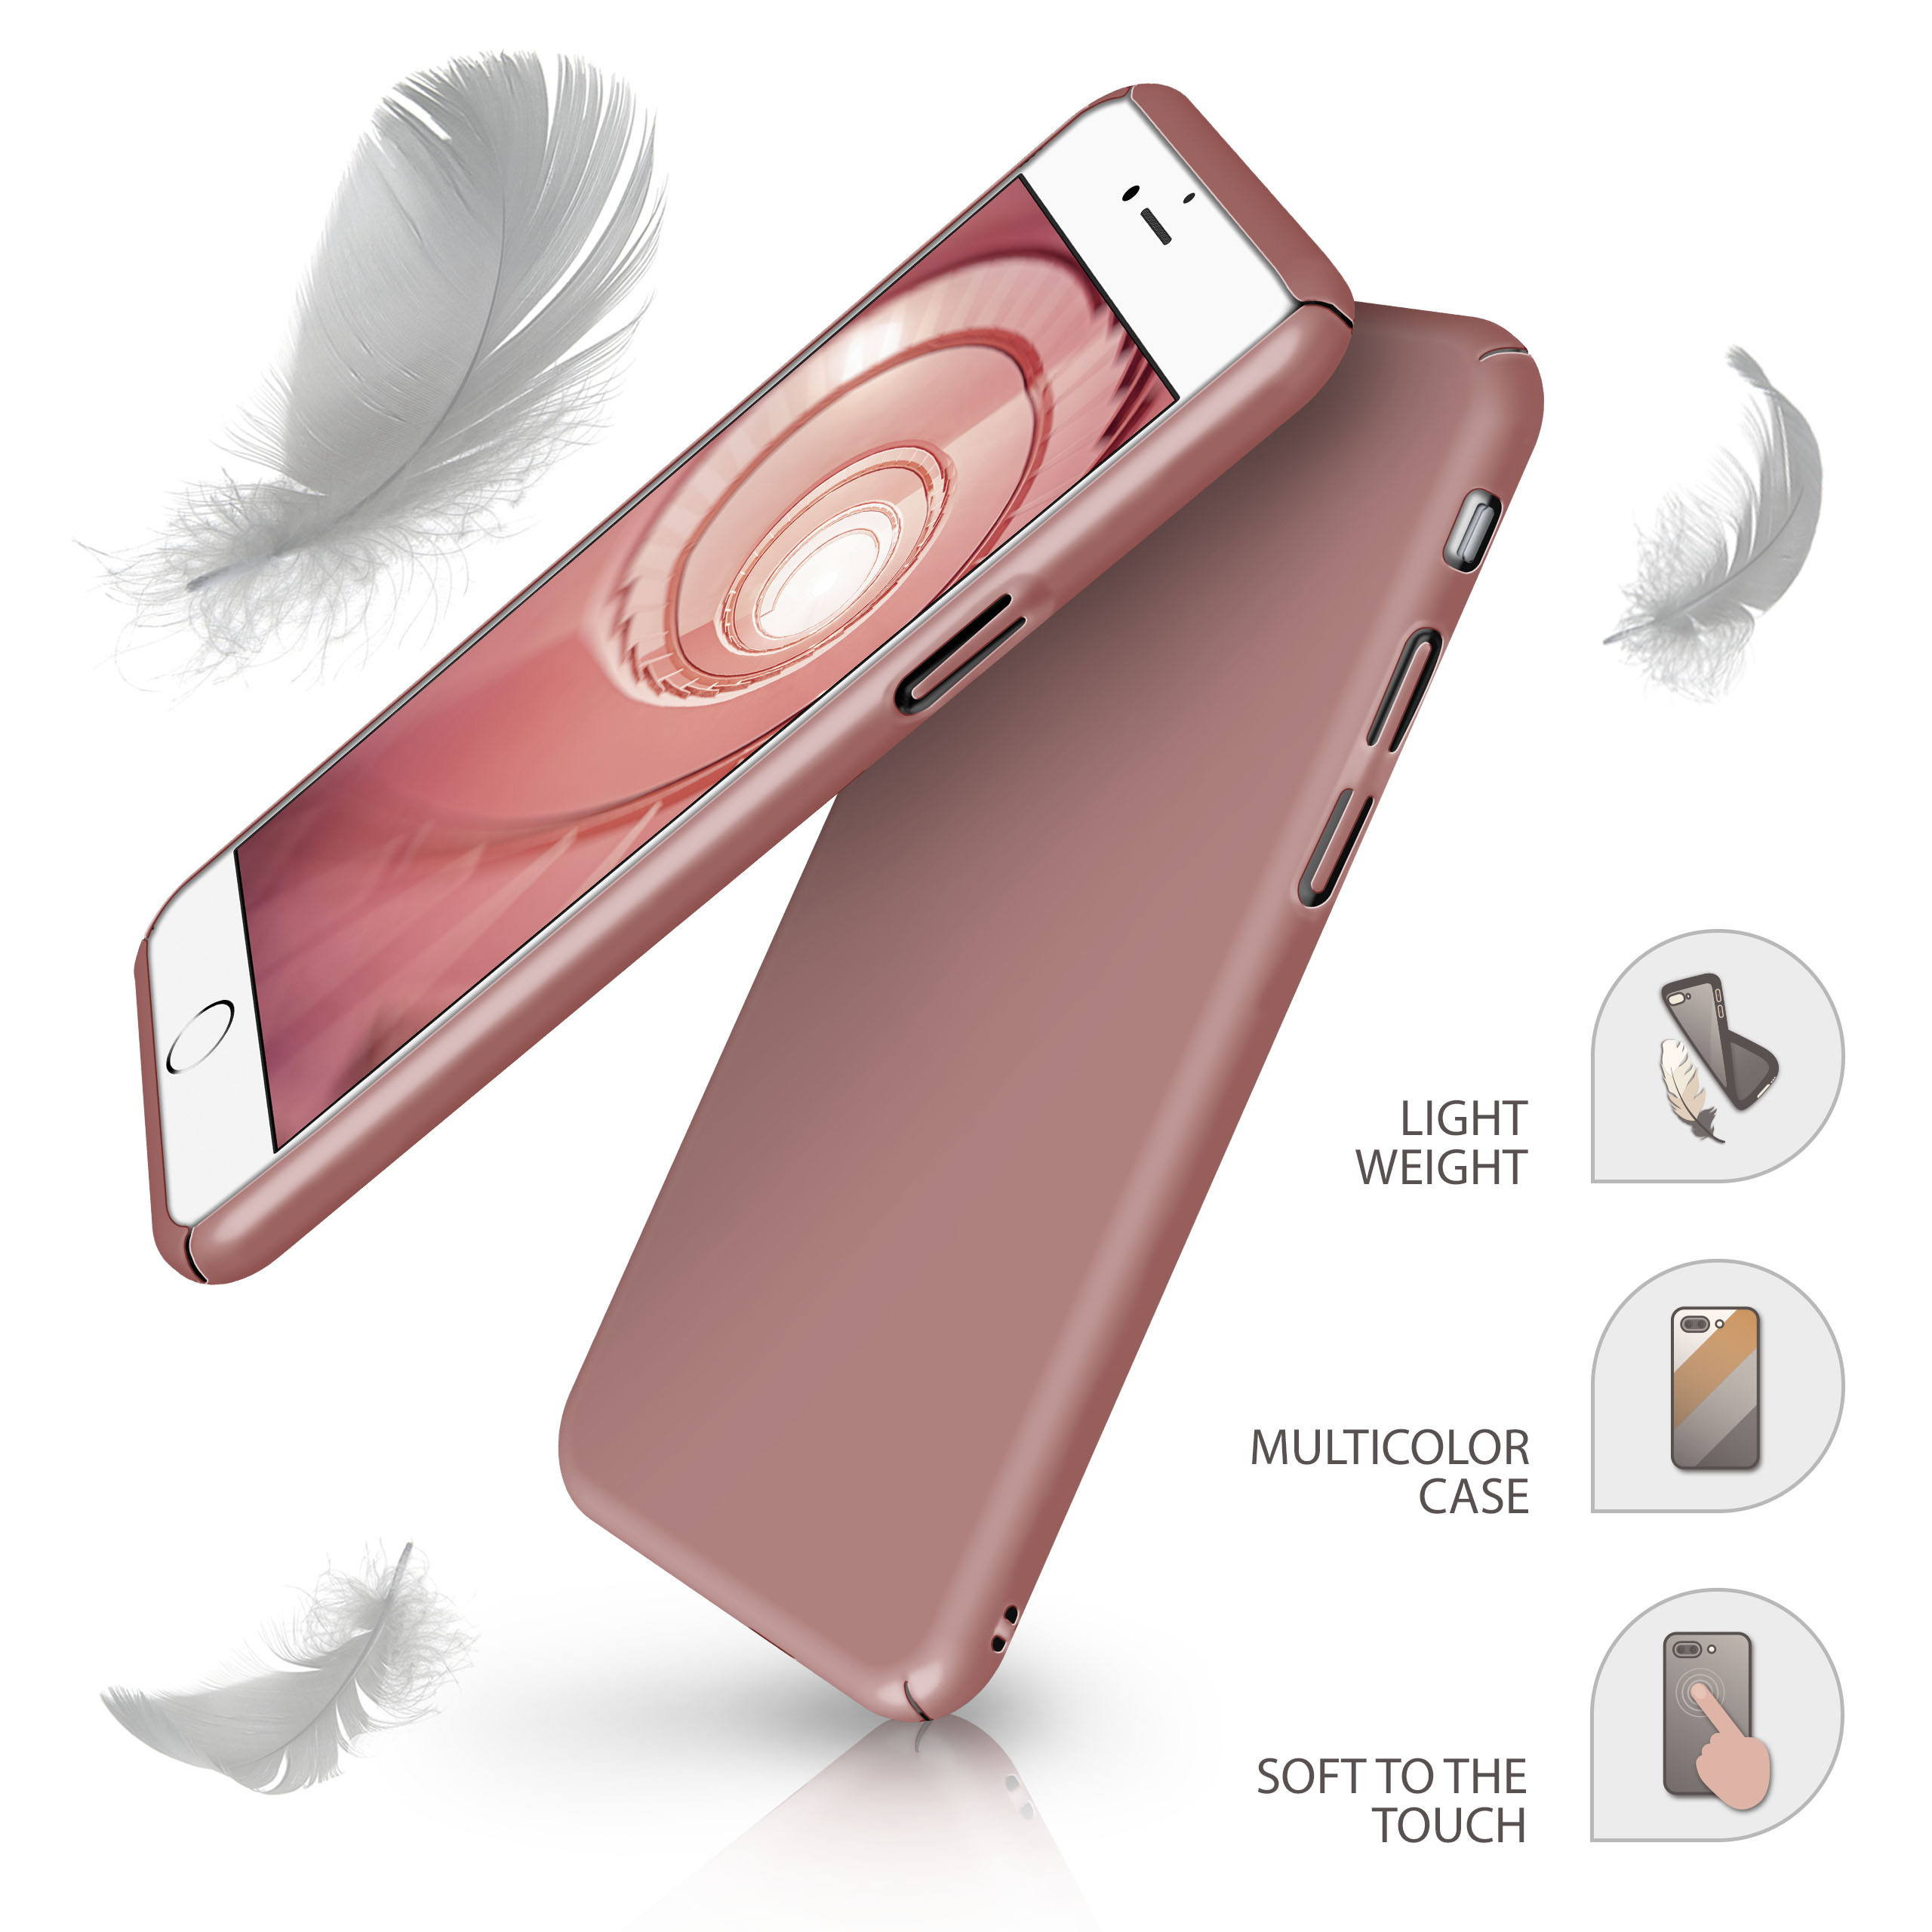 MOEX Alpha Case, Backcover, Apple, / iPhone iPhone 8, Rose Gold 7